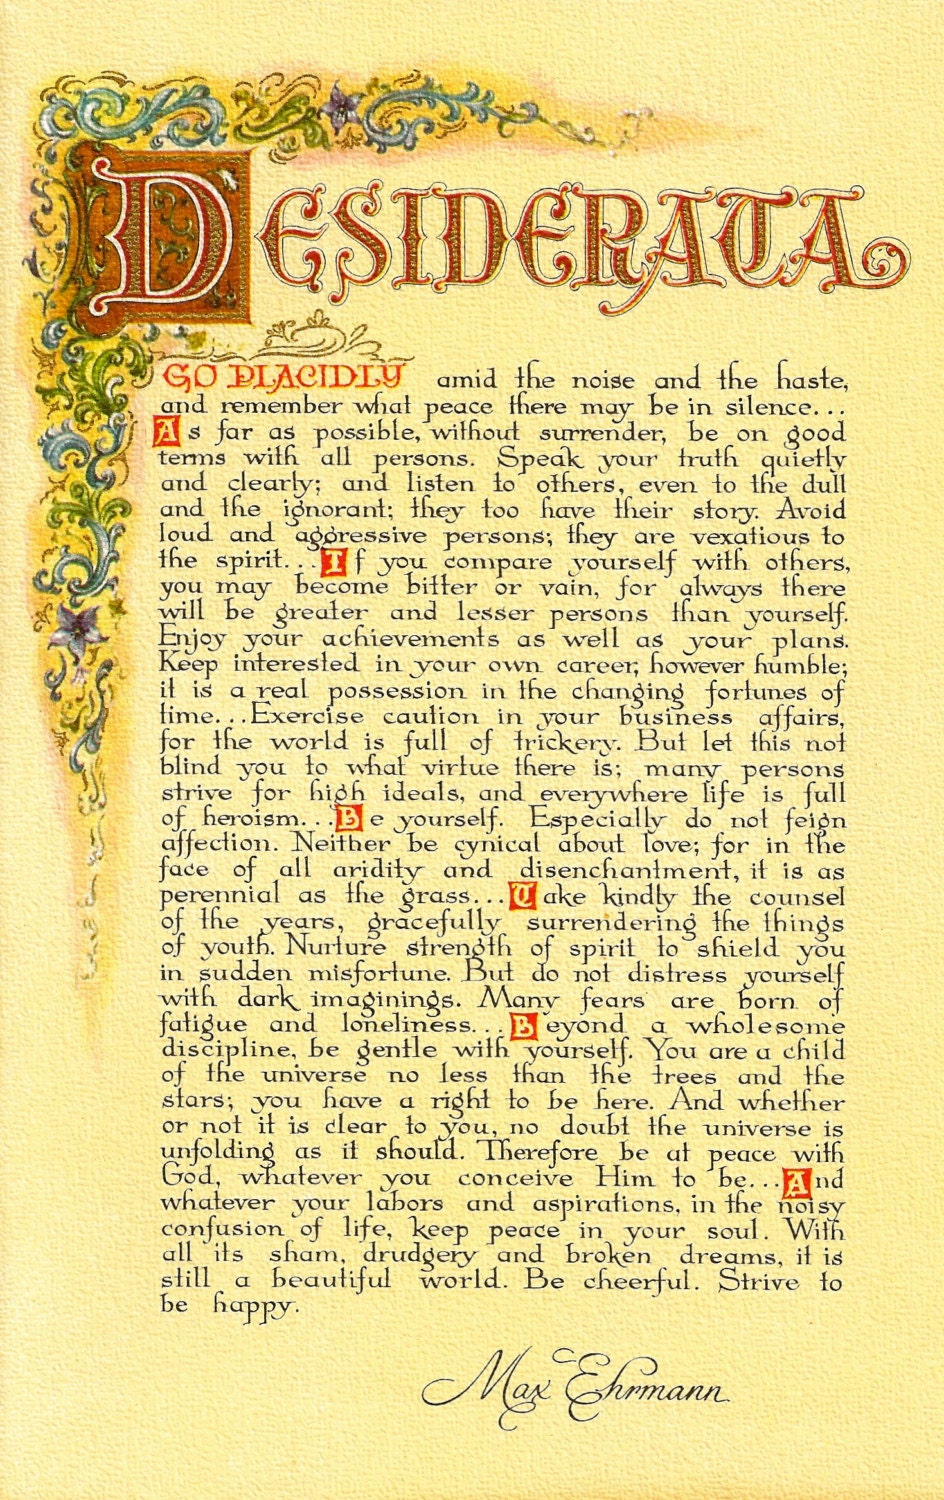 the-back-cover-of-desiderataa-written-in-black-and-gold-on-an-orange